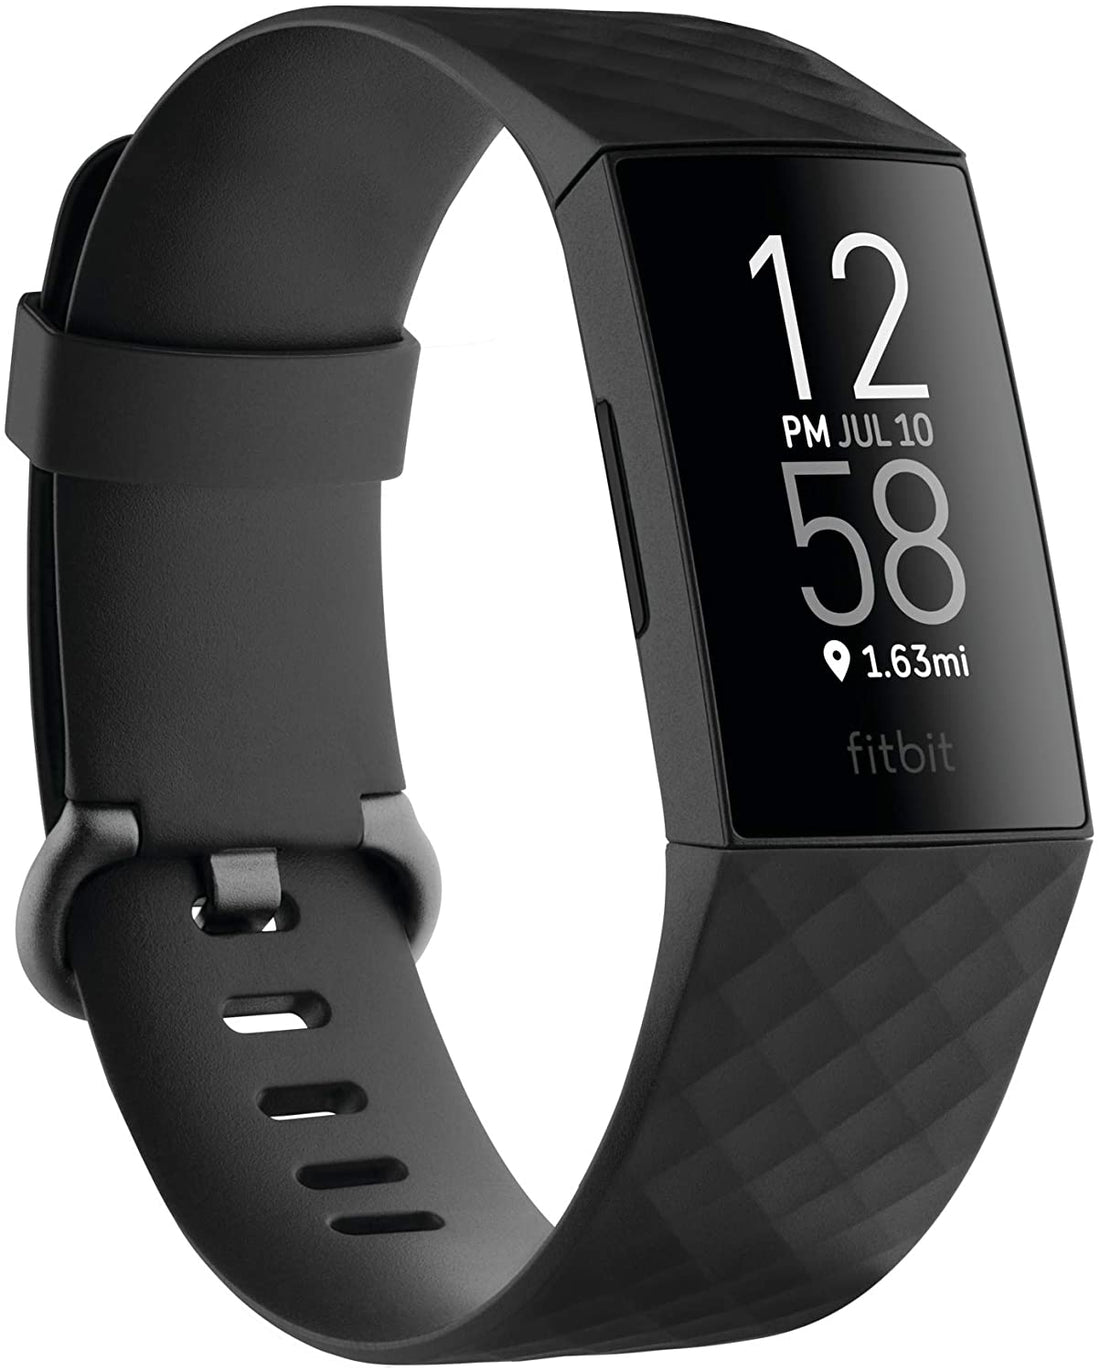 Fitbit Charge 4 Fitness &amp; Activity Tracker with Built-in GPS, Heart Rate - Black (Certified Refurbished)